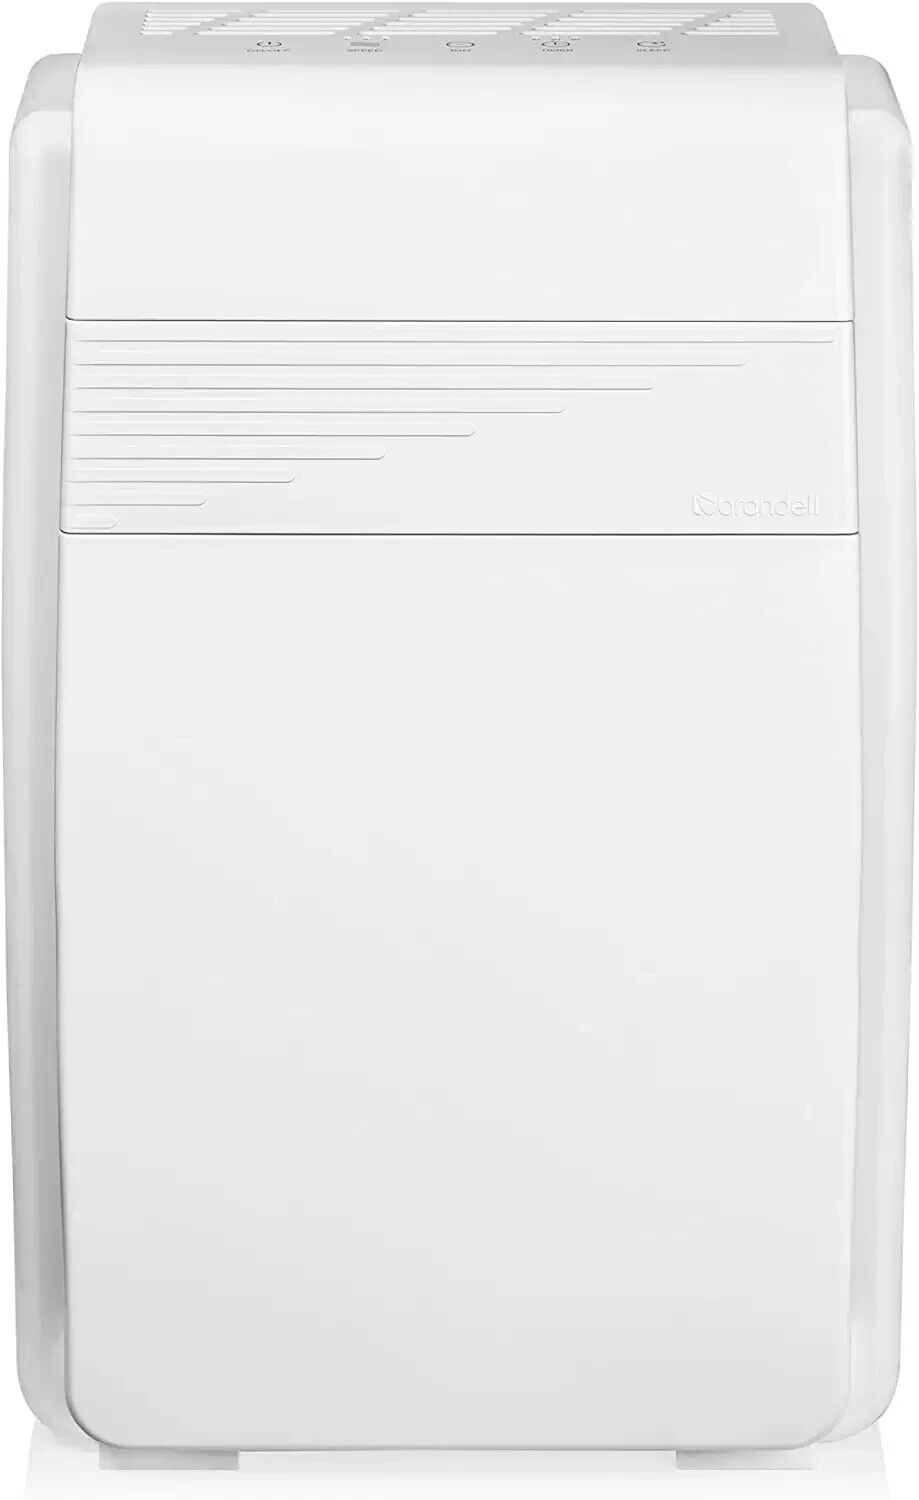 Brondell Horizon O2+ Air Purifier P200, 5 Stage Filtration System HEPA Filter